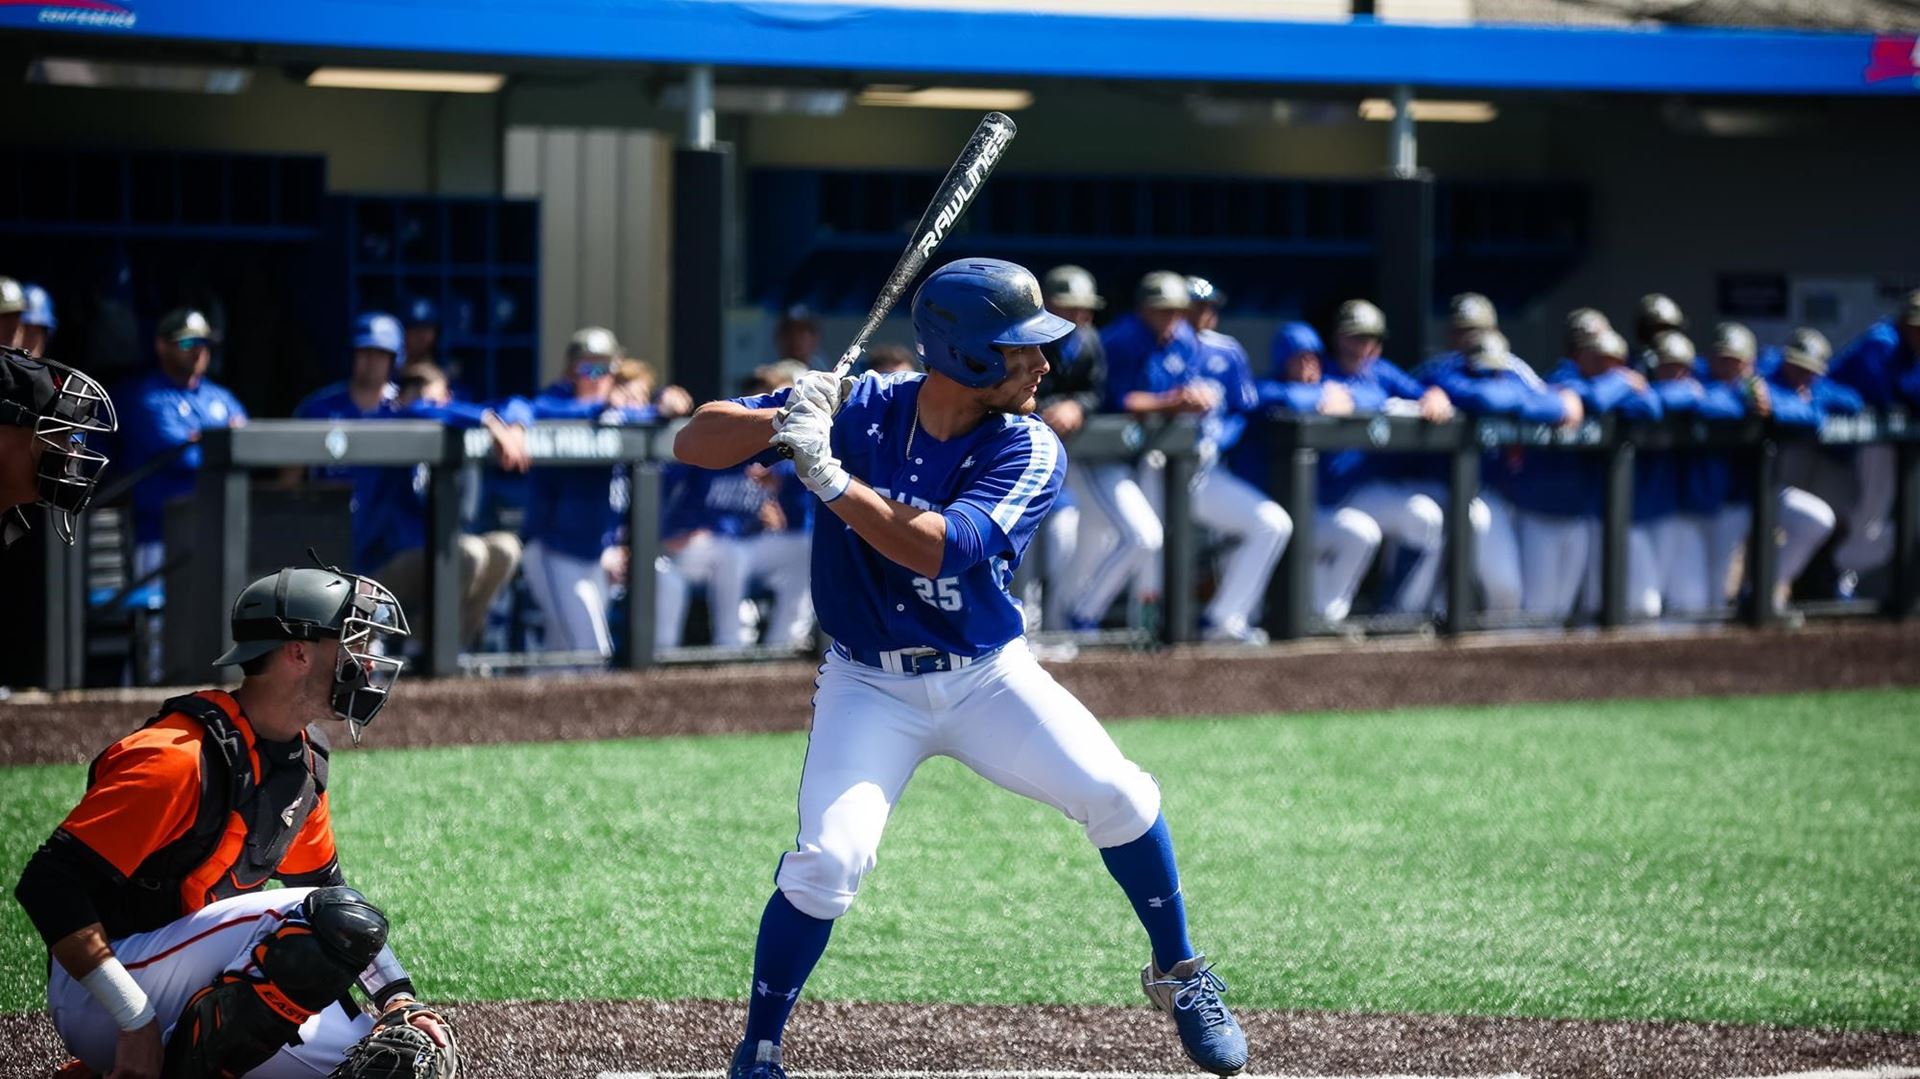 A Seton Hall batter stands at the plate during a home game.